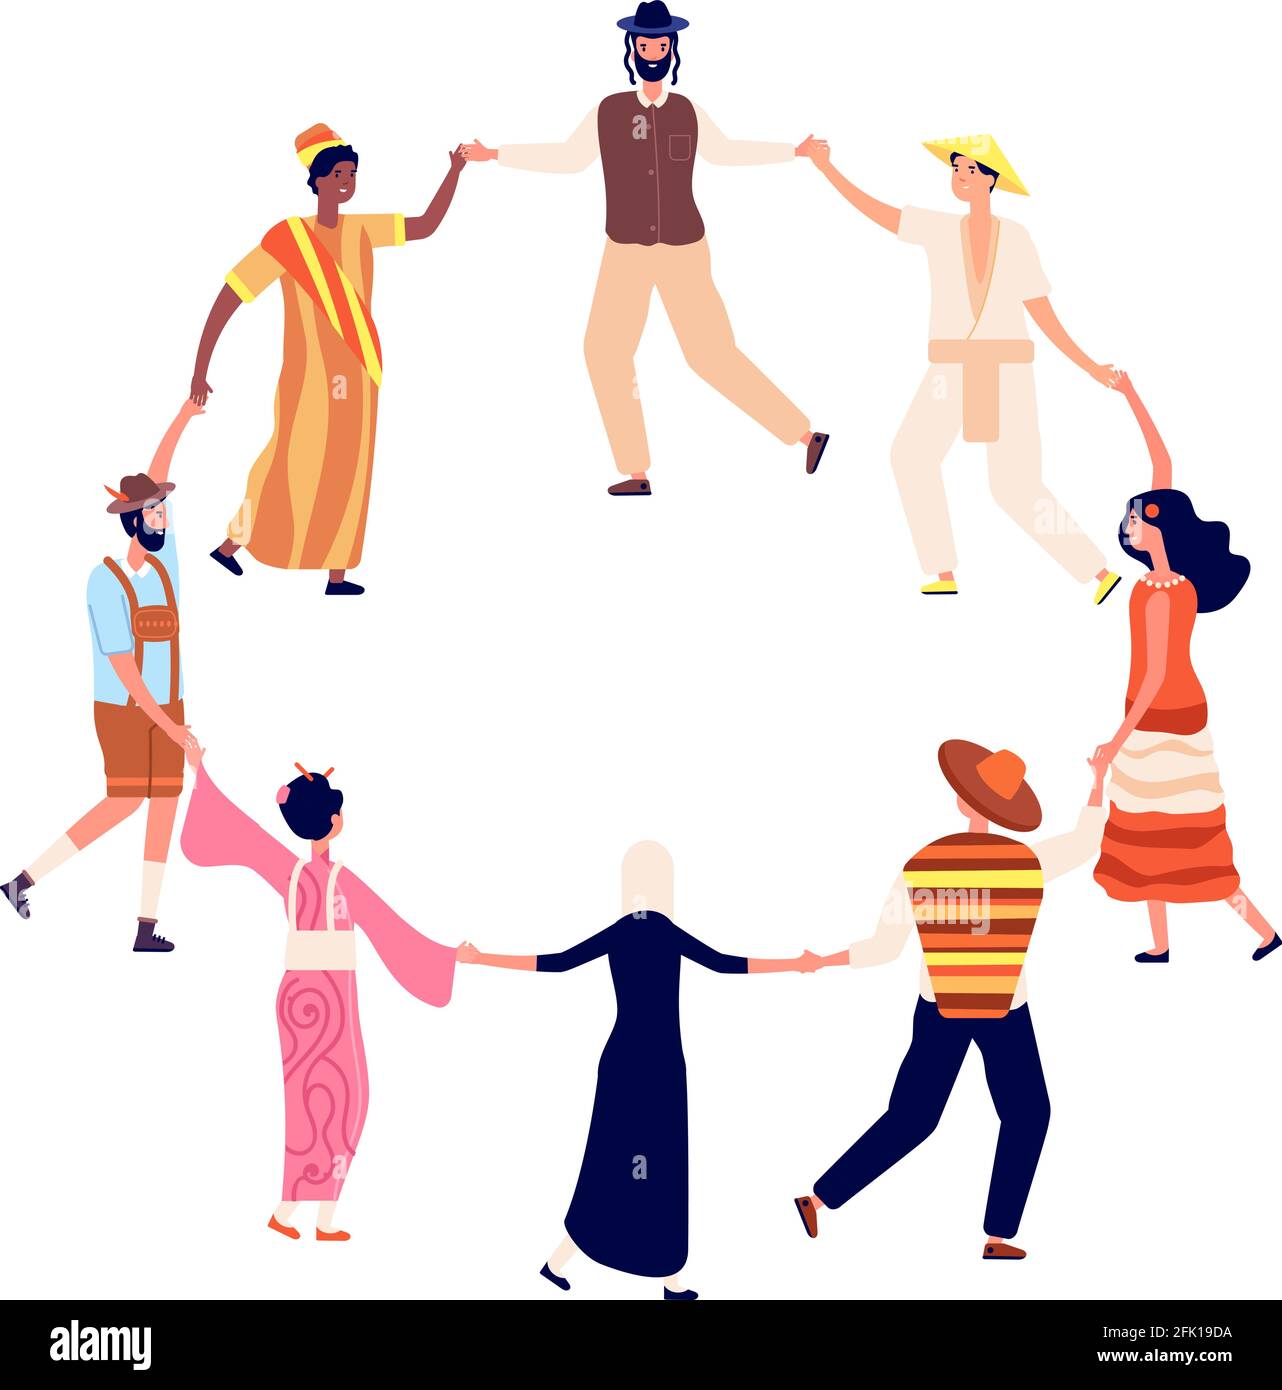 People round dance. Adults friends circle in dancing. Friendship, humans hold hand. Men women together, multicultural society vector concept Stock Vector